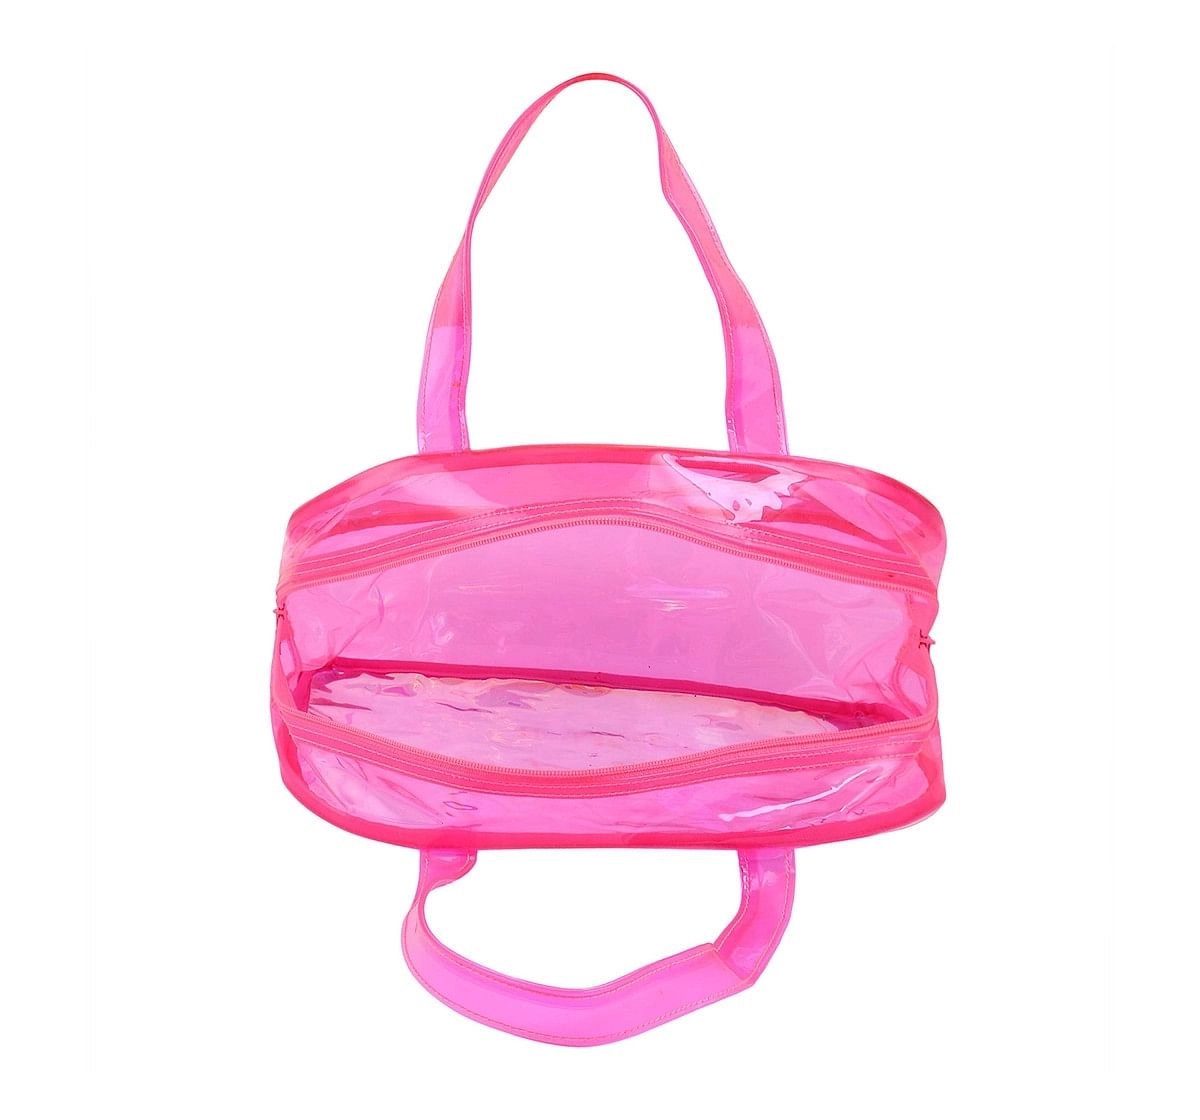 Hamster London Boston Bag for age 3Y+ (Pink)